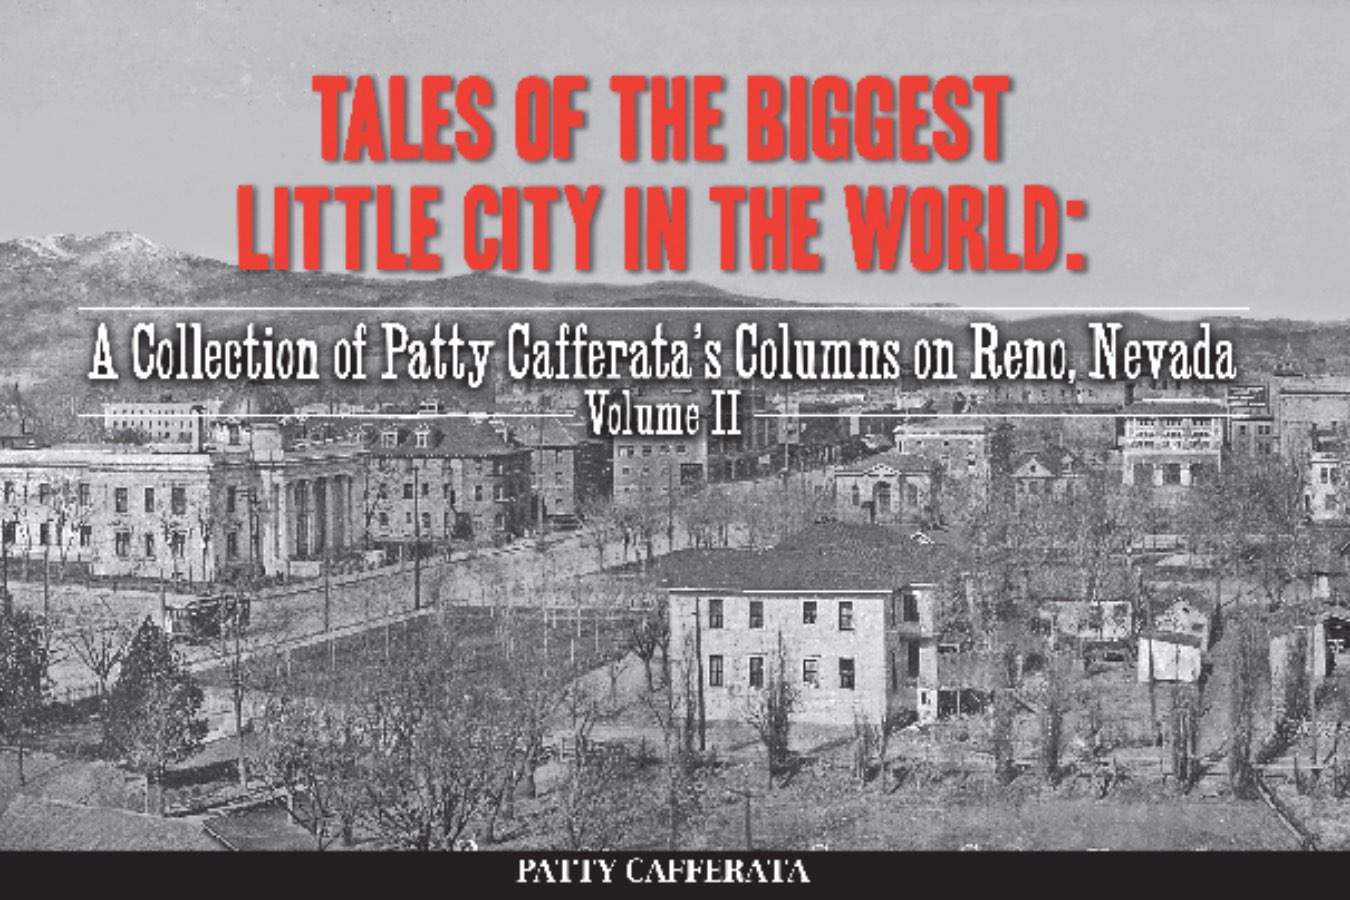 tales-of-the-biggest-little-city-in-the-world-a-collection-of-patty-cafferata-s-columns-on-reno-nevada-volume-ii Image